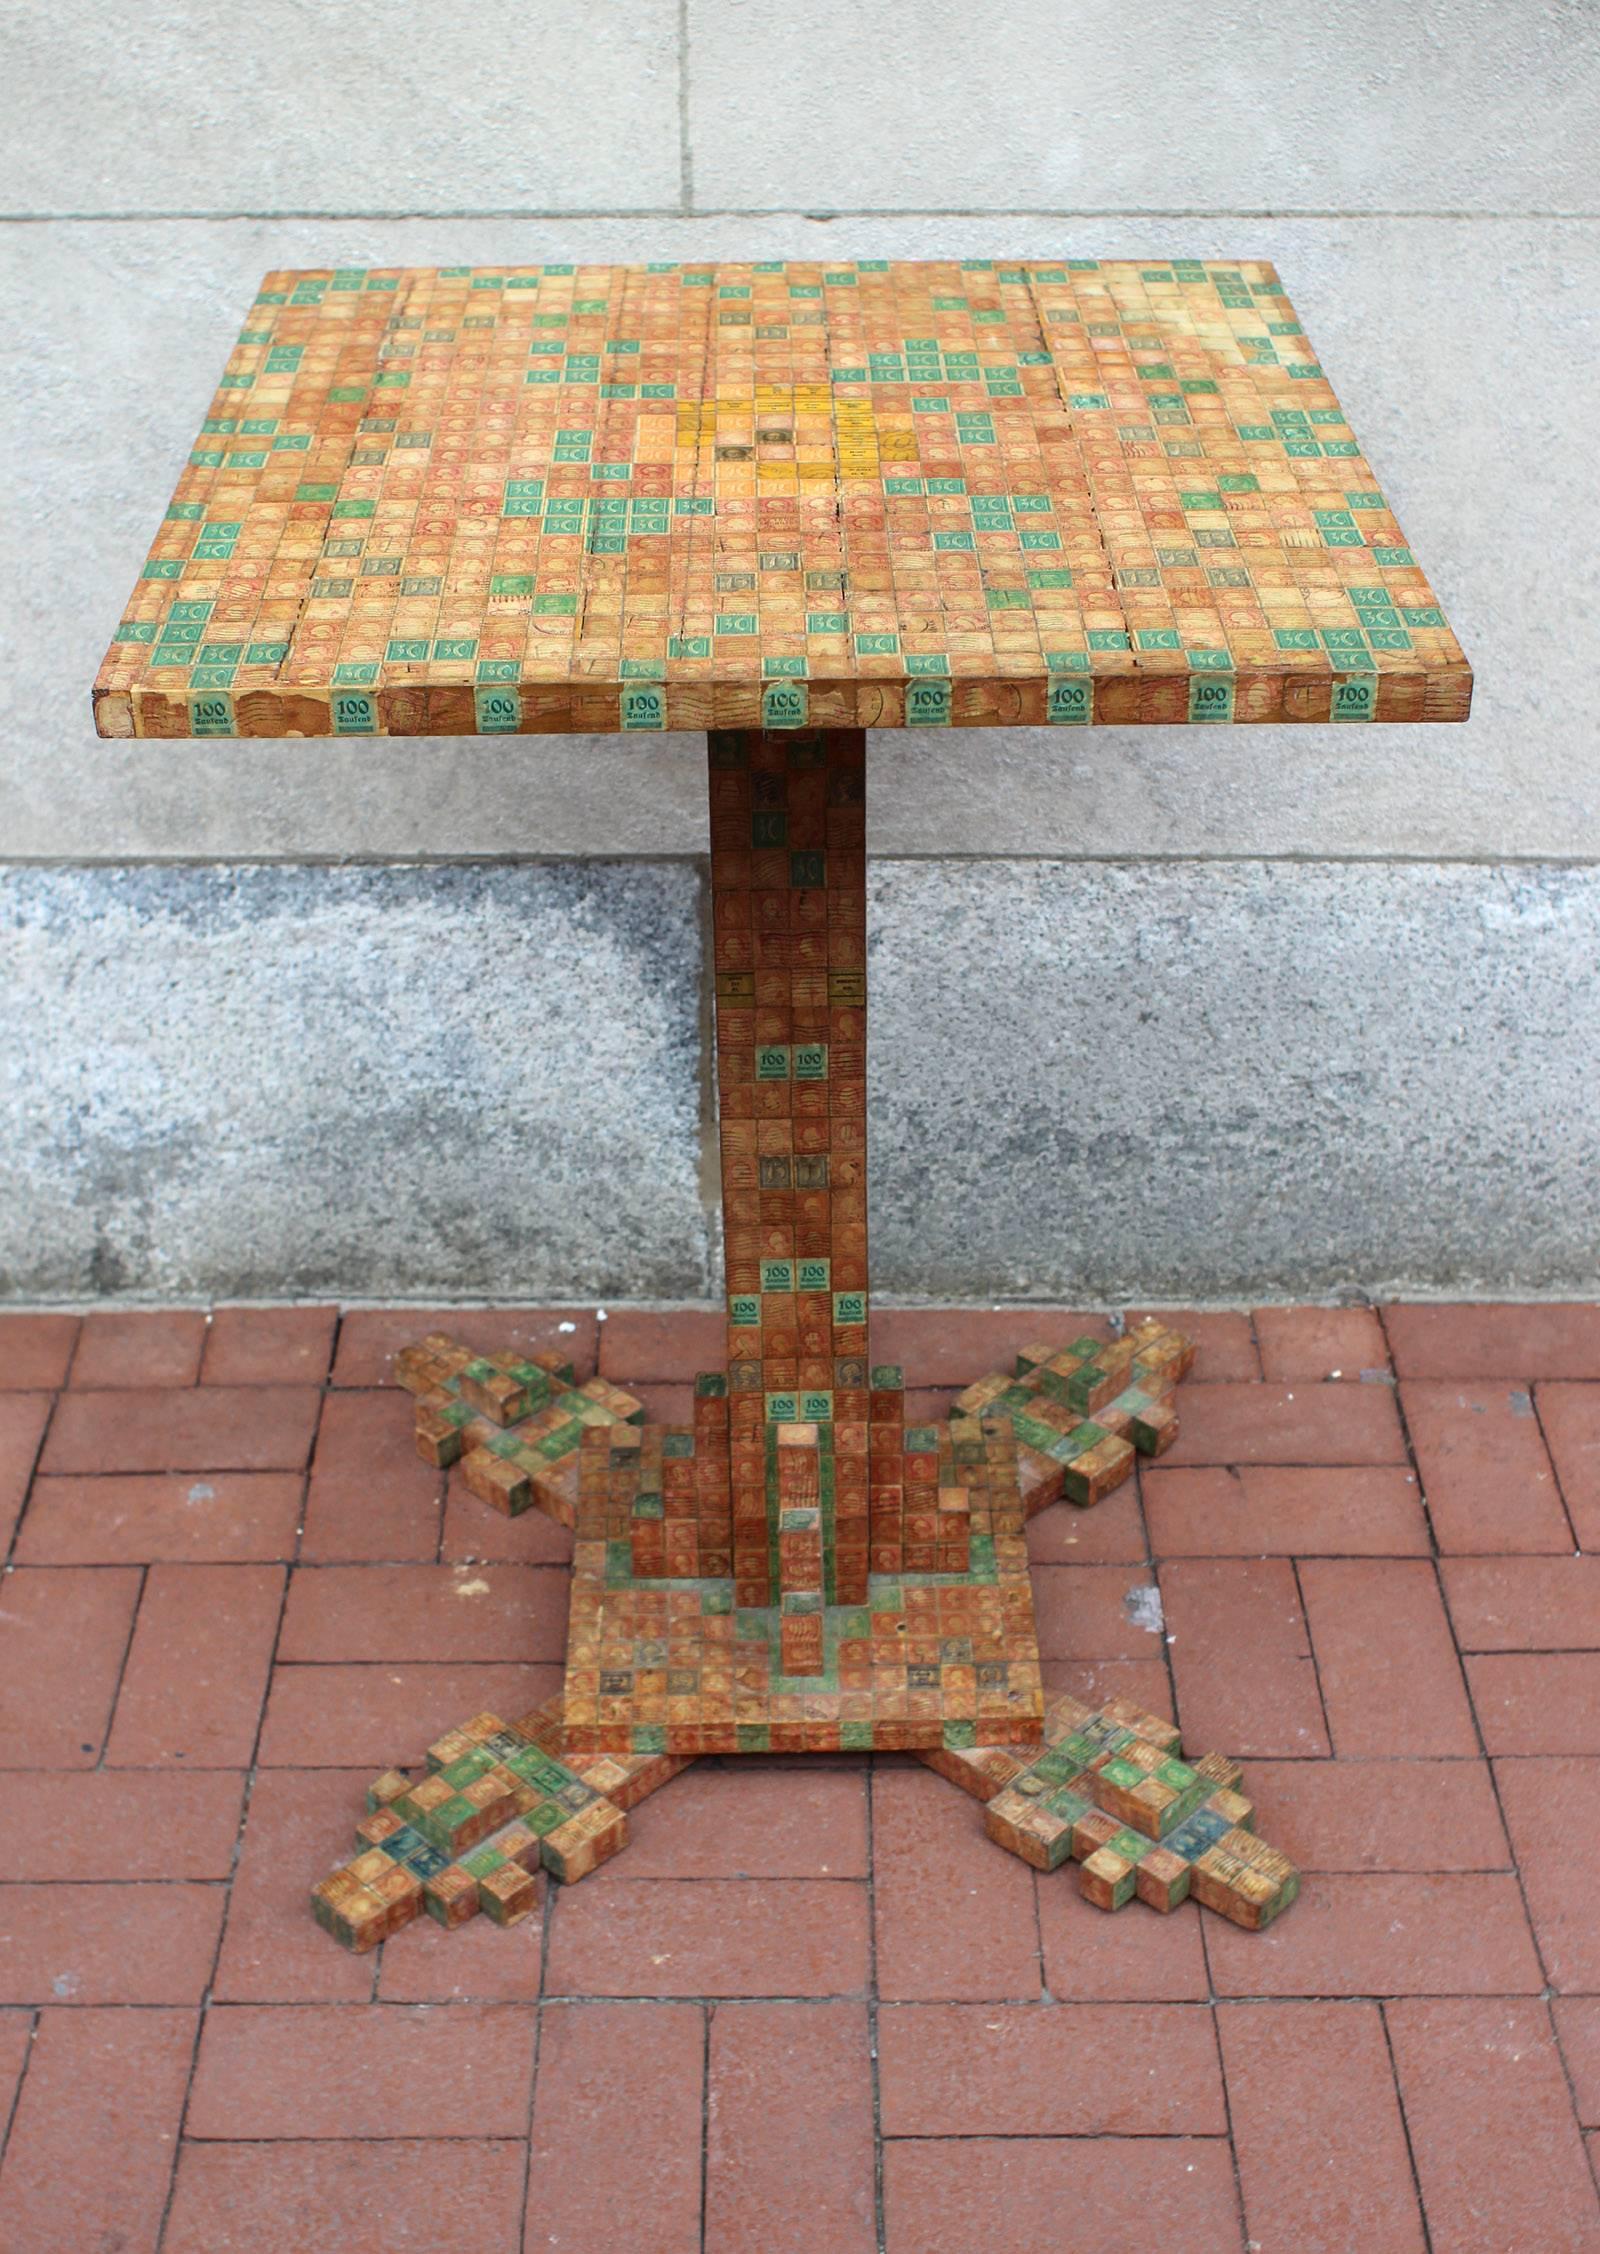 Center table fully decorated with cancelled stamps. The design of the table was such that the dimensions of every part of it are determined by the height and width of a postage stamp and every inch was covered by full stamps. American, probably